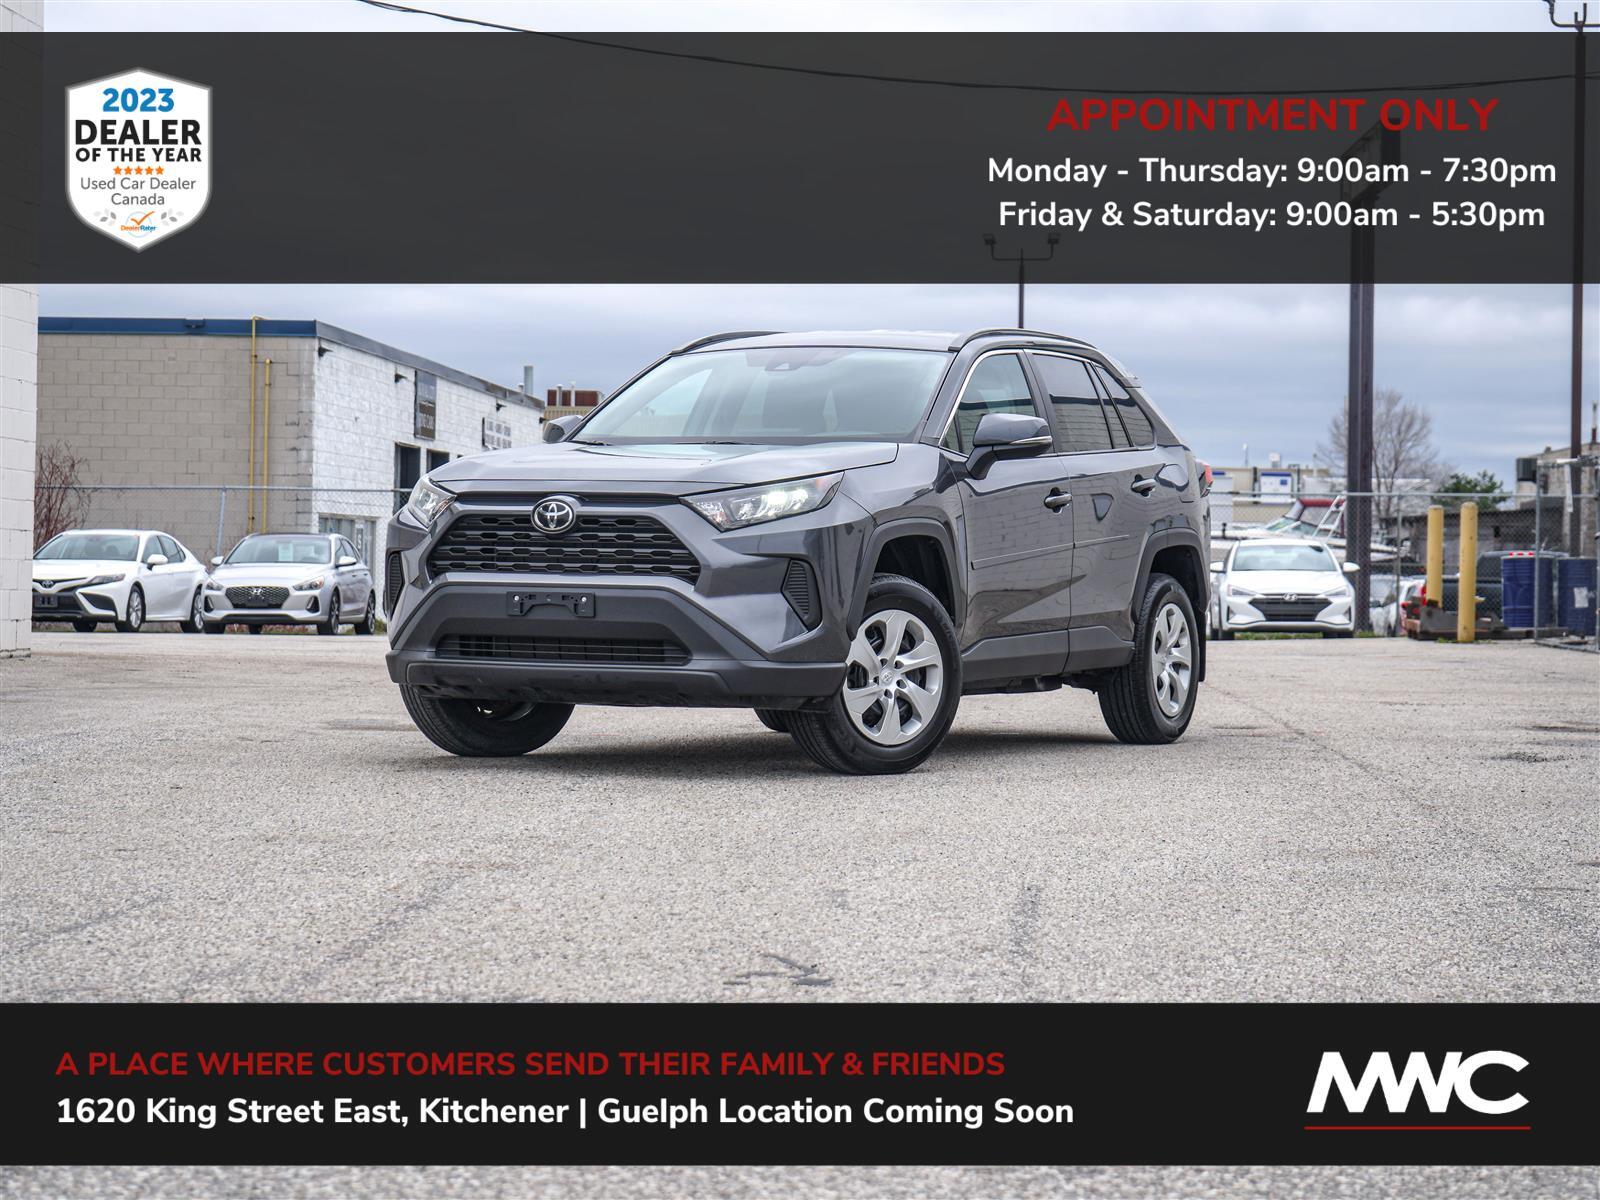 2019 Toyota RAV4 LE FWD | IN GUELPH, BY APPT. ONLY